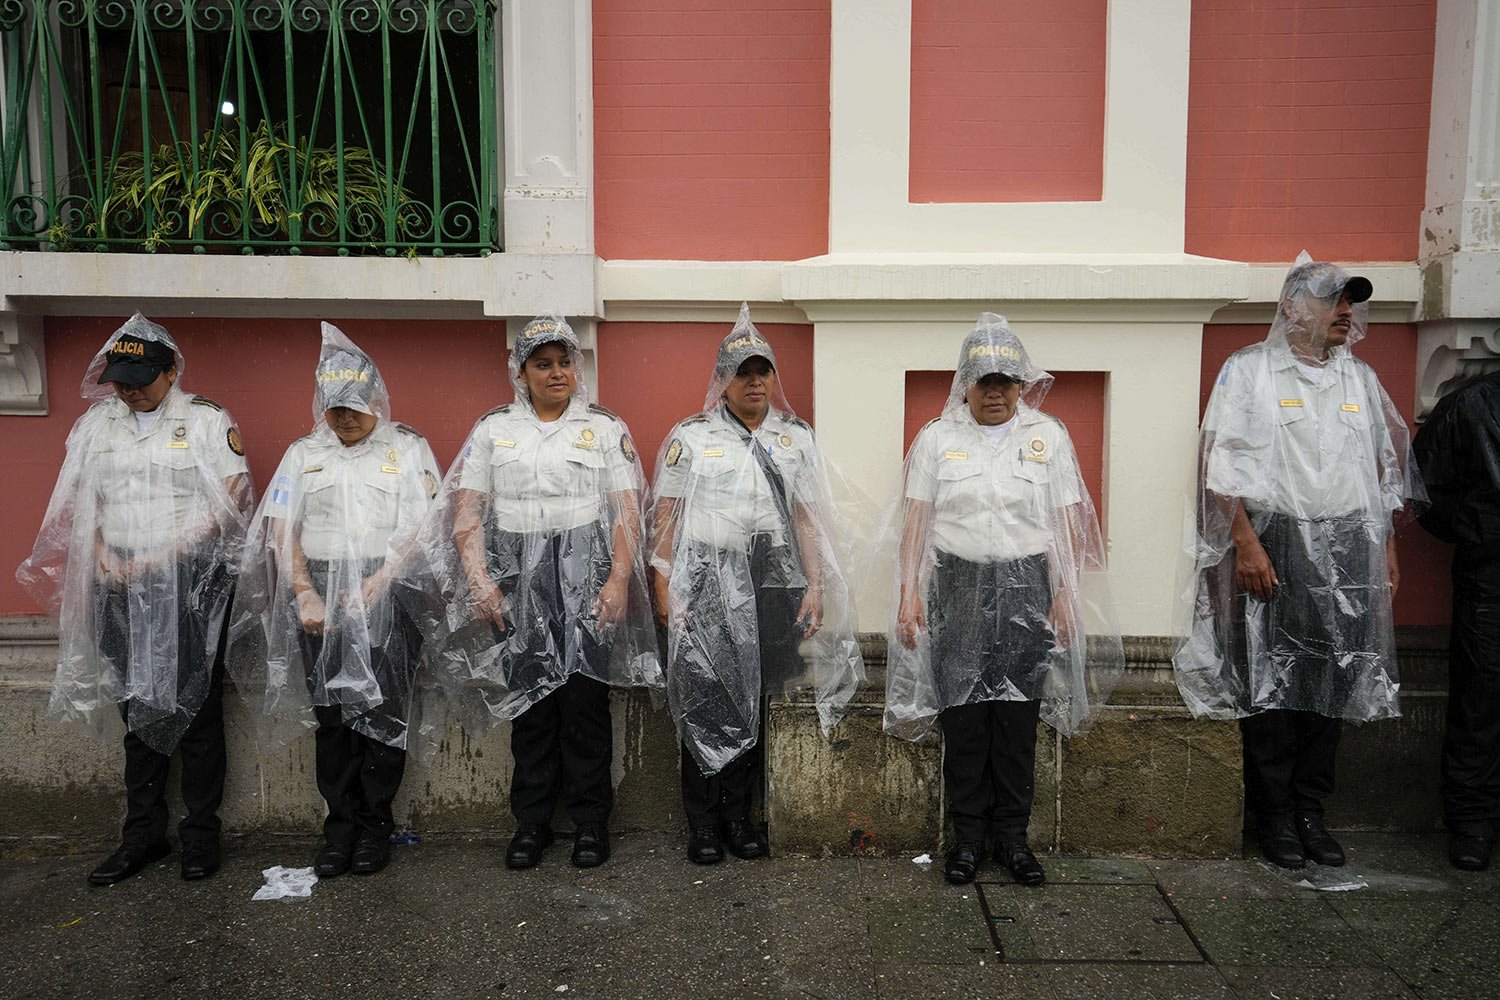  Police stand in the rain guarding the perimeters of the Electoral Court building as demonstrators march to support the electoral process in Guatemala City, July 8, 2023. (AP Photo/Moises Castillo) 